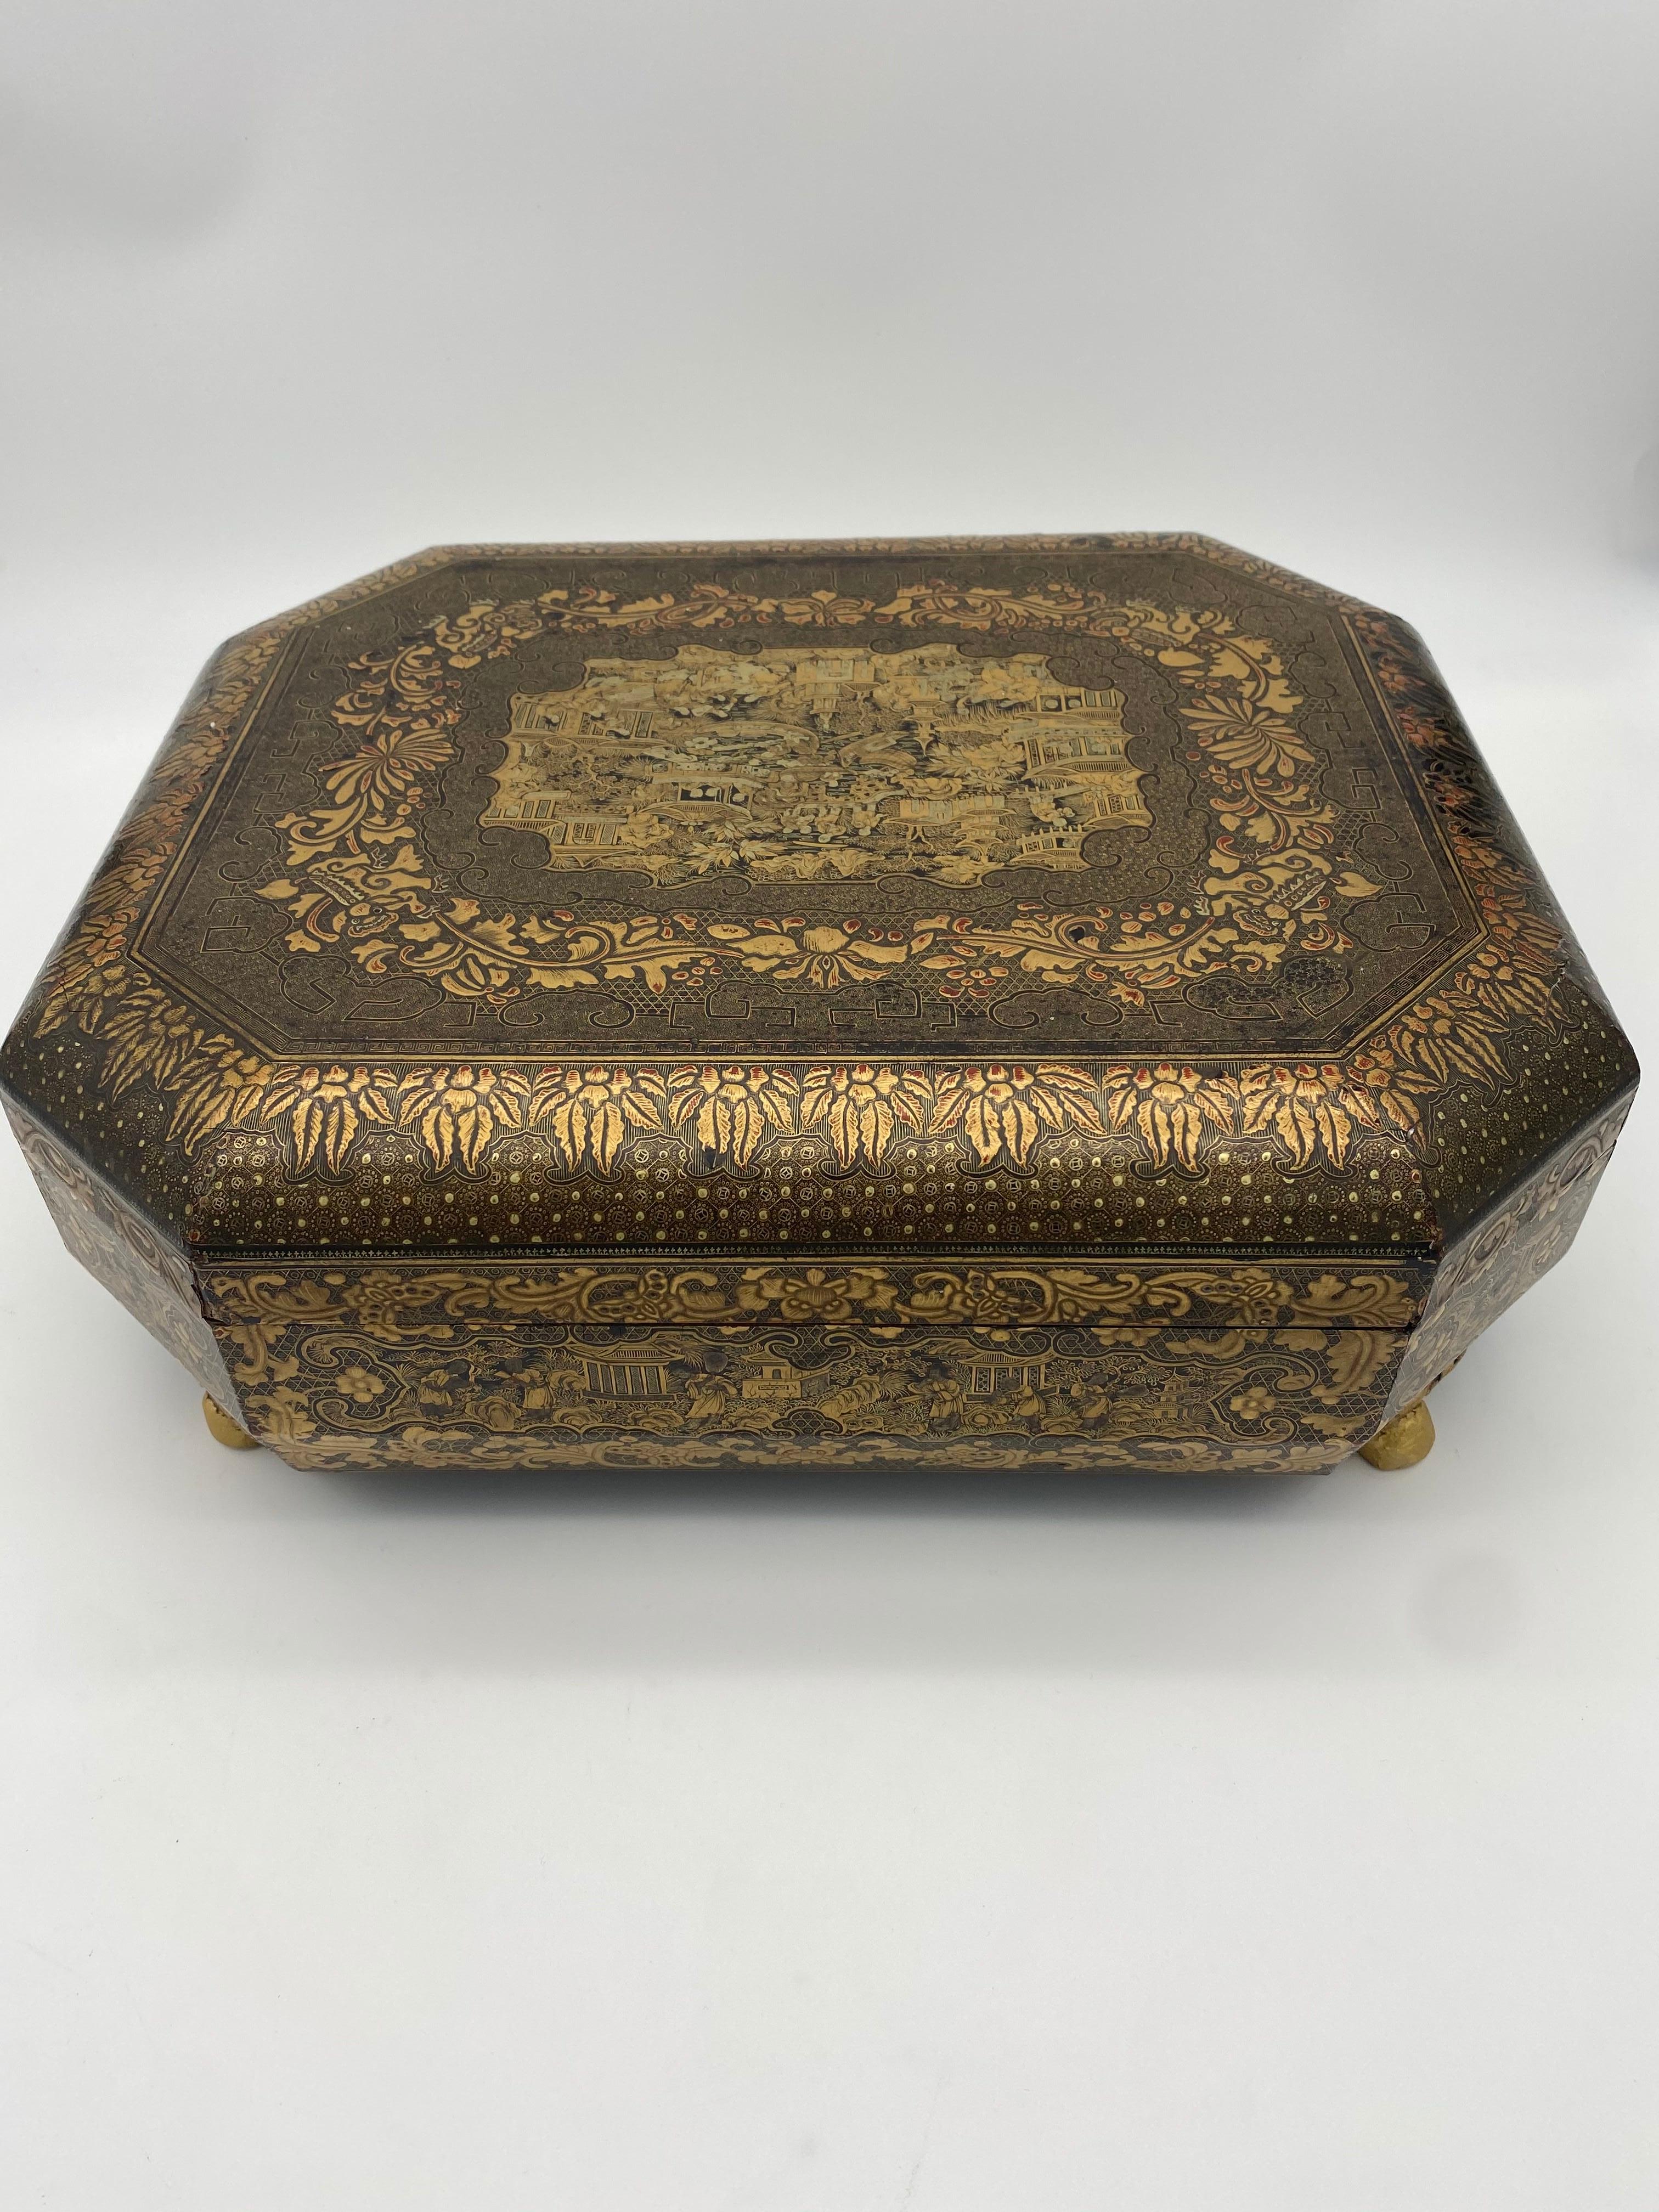 Antique 19th century export Chinese lacquer gaming box with hand painted scenes gilt export black lacquer, there are 7 gaming boxes and 12 trays, 14.5 inch x 11 x 4.5, very good condition.